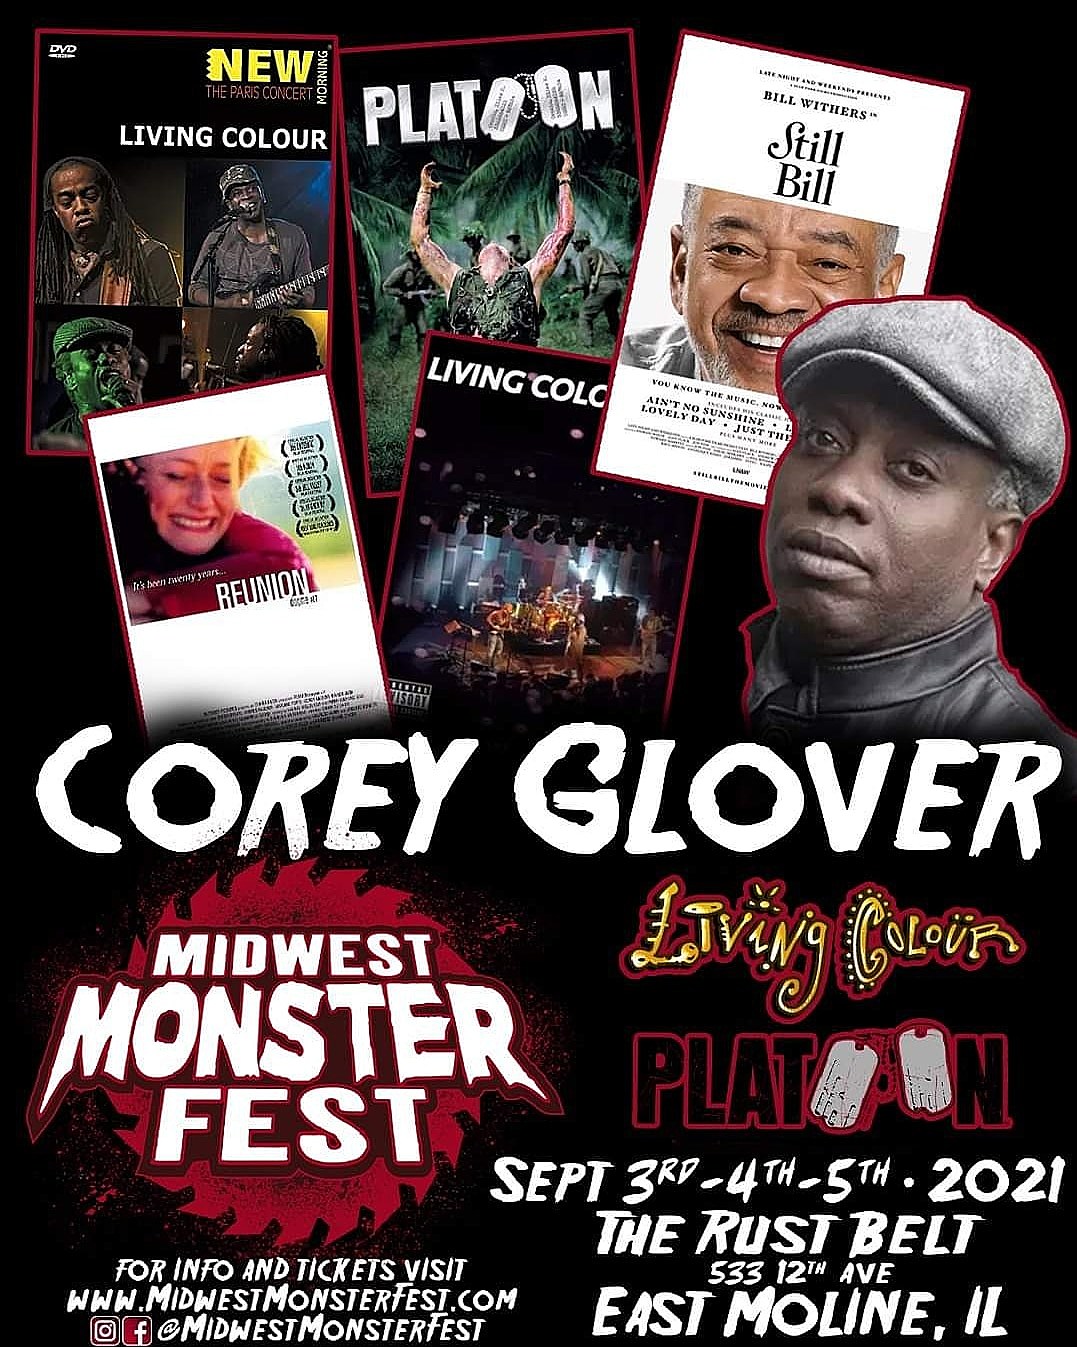 Three Days of Freaky Fun at Midwest Monster Fest!